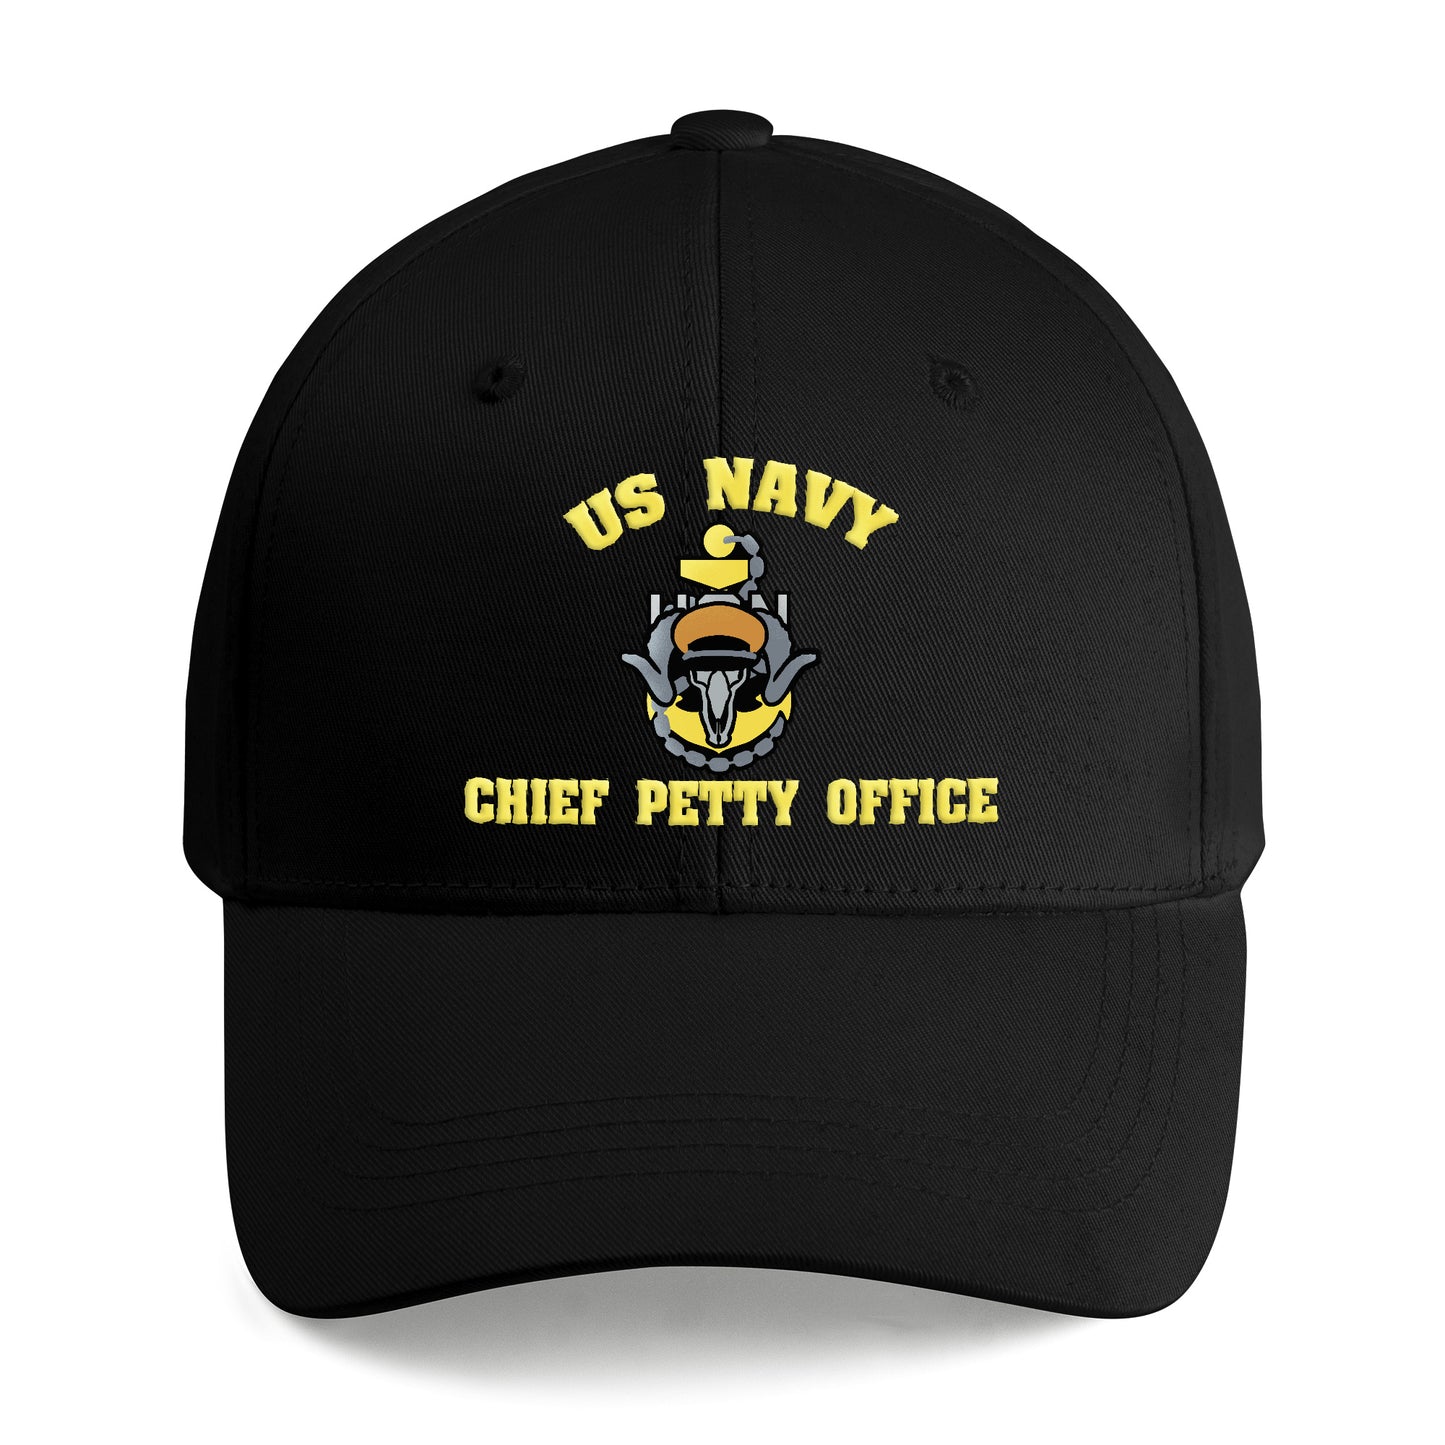 US Navy Chief with Goat Skull anchor Embroidered Cap